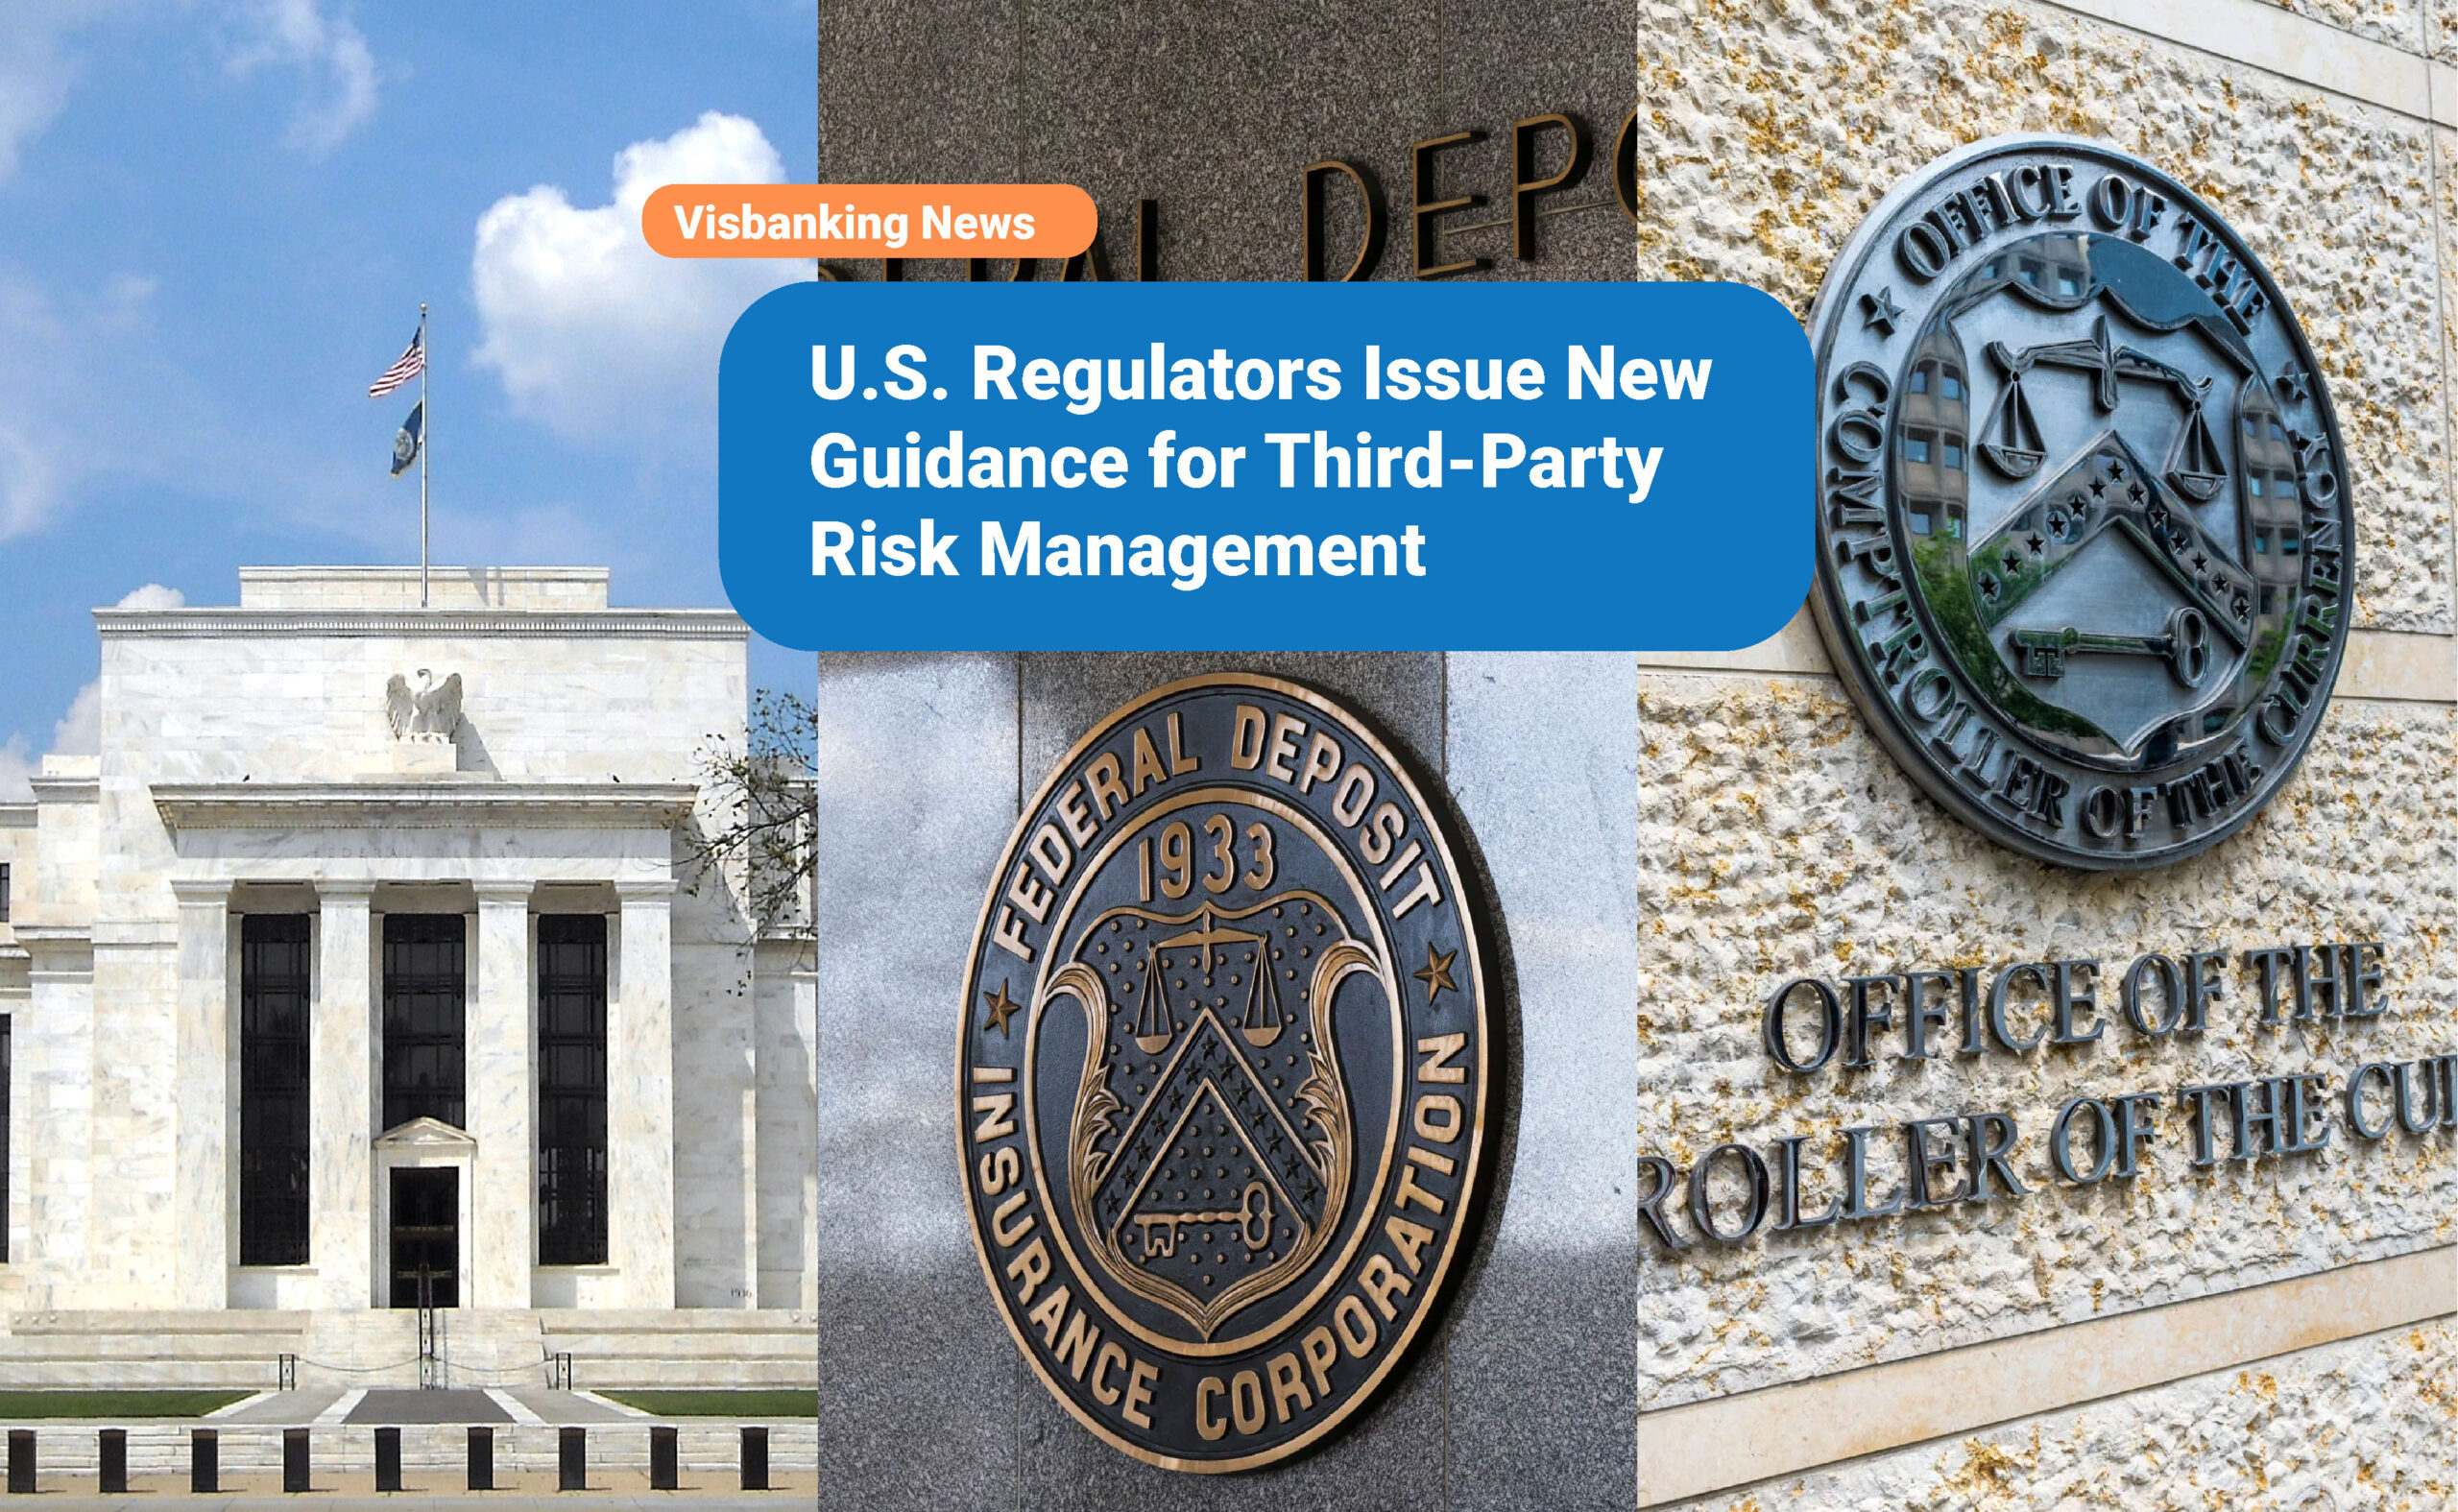 U.S. Regulators Issue New Guidance for Third-Party Risk Management